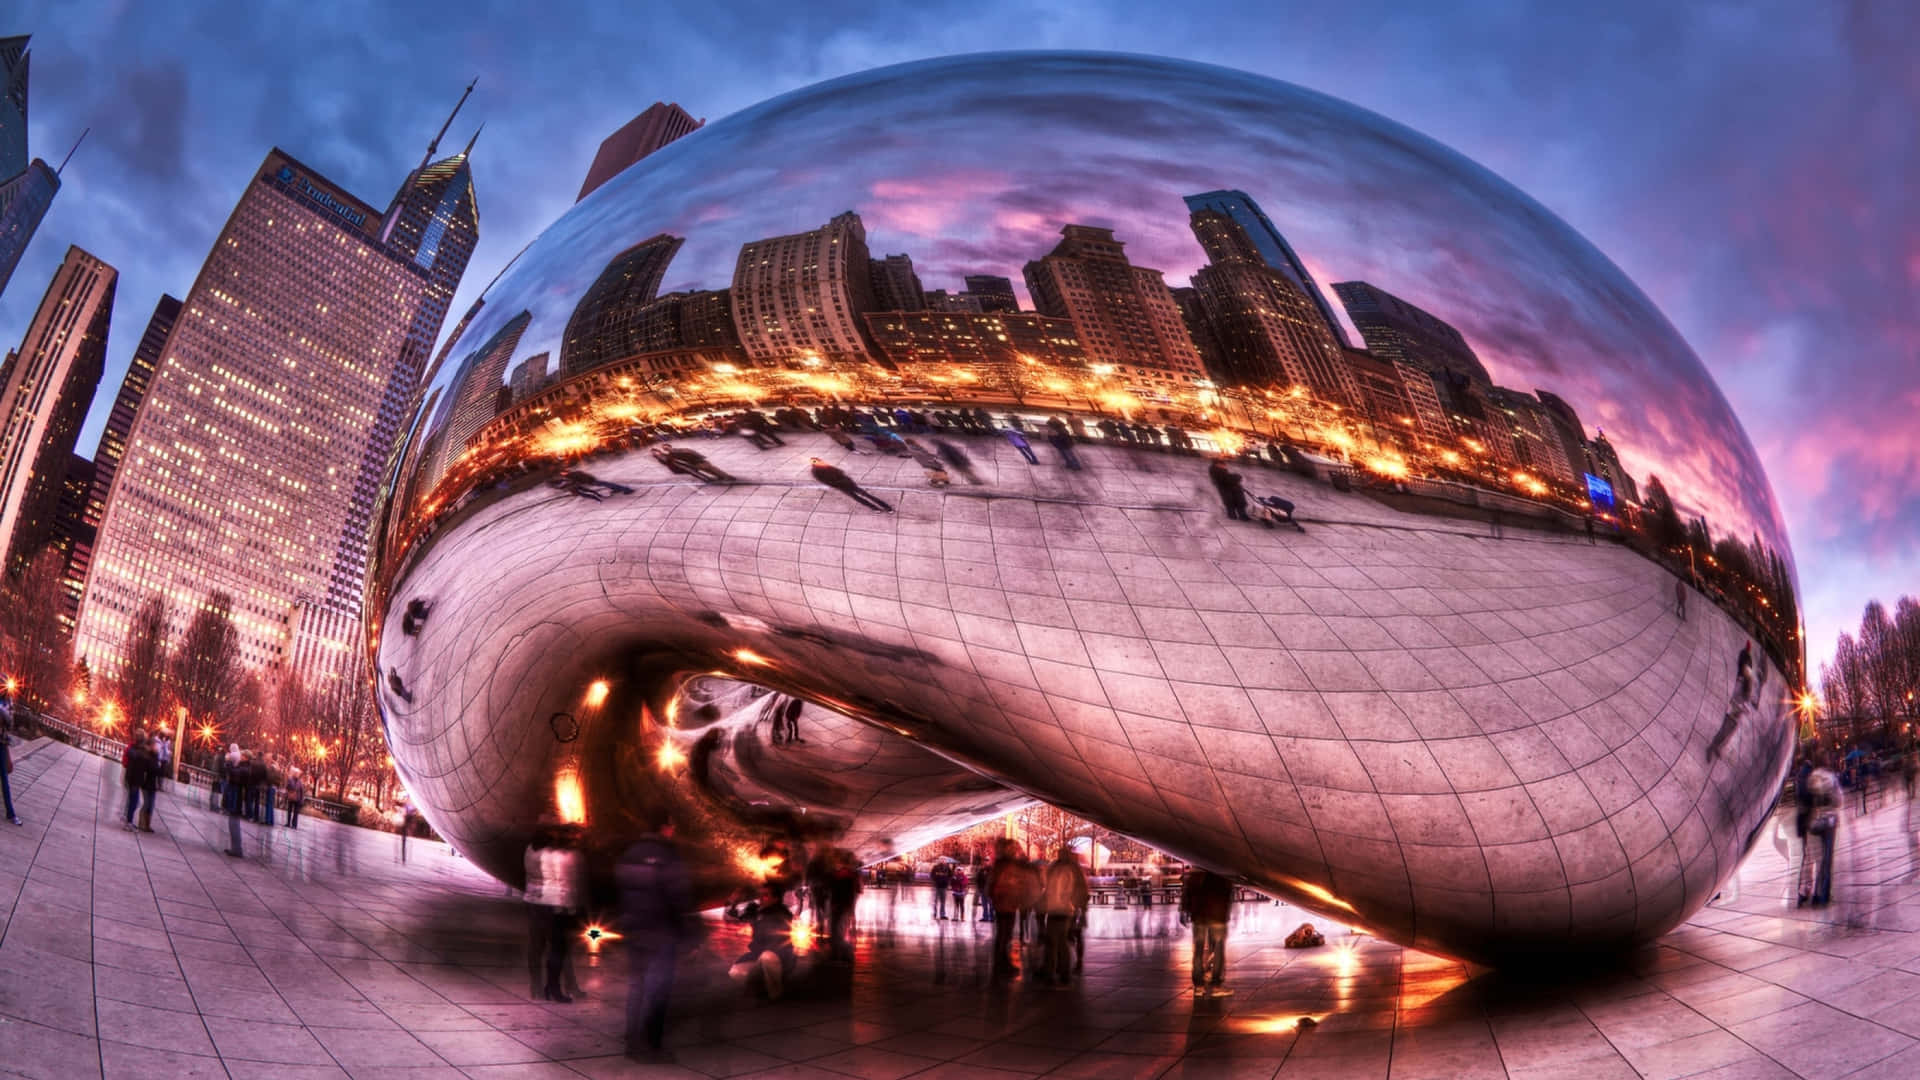 1440p Travel The Bean Chicago Background